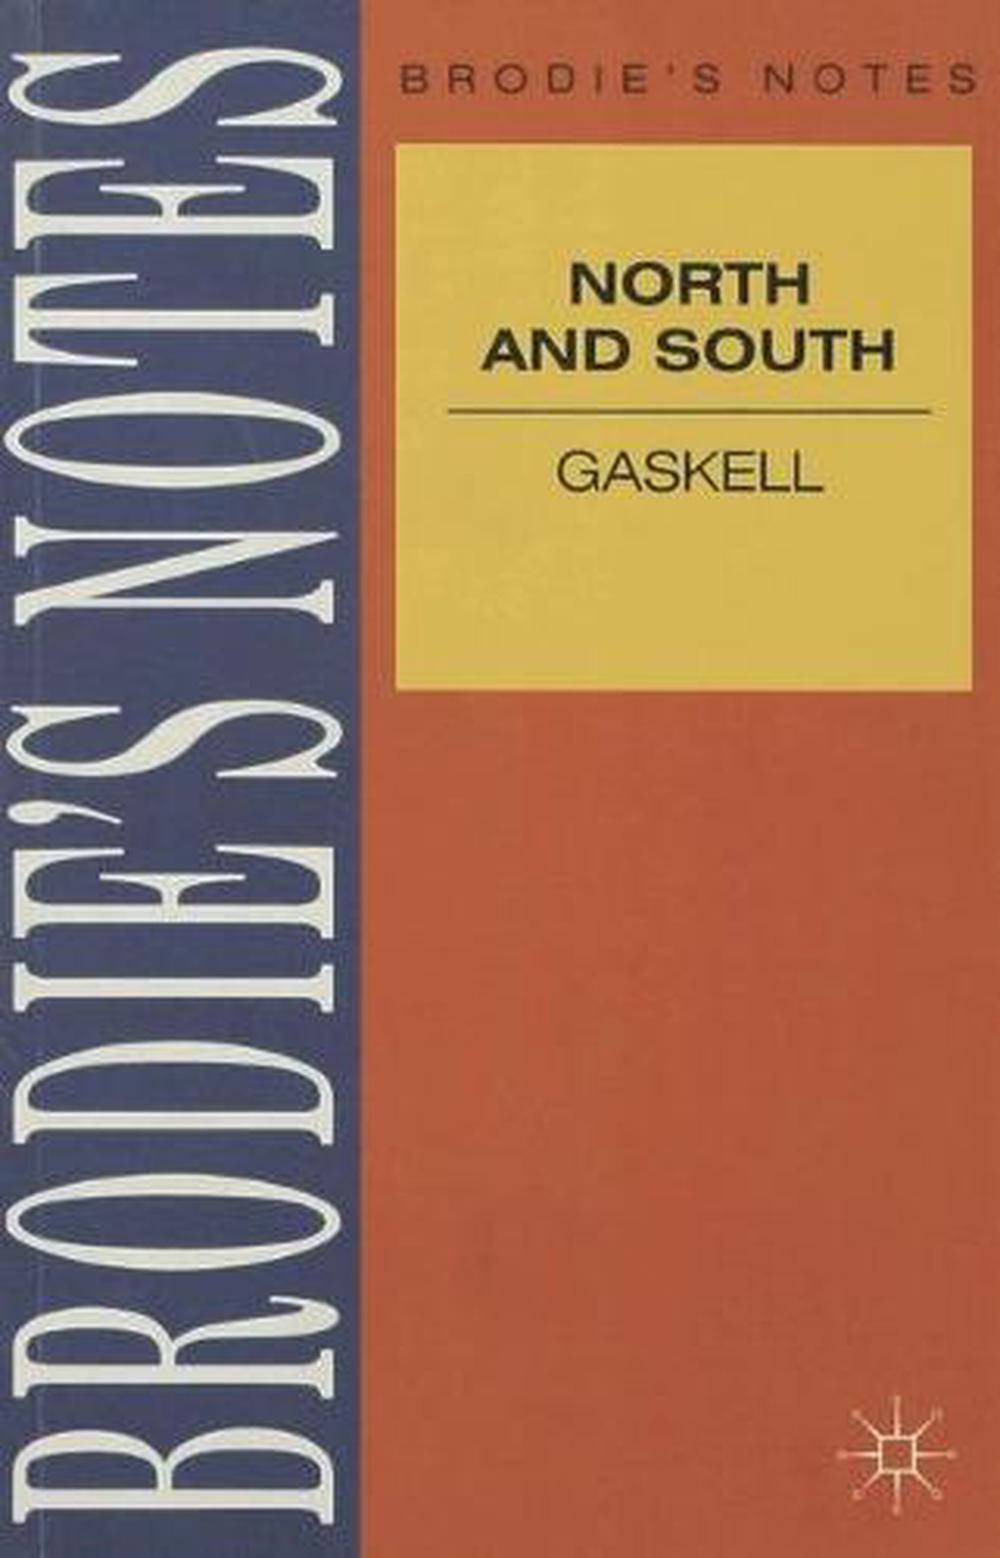 gaskell north and south sparknotes